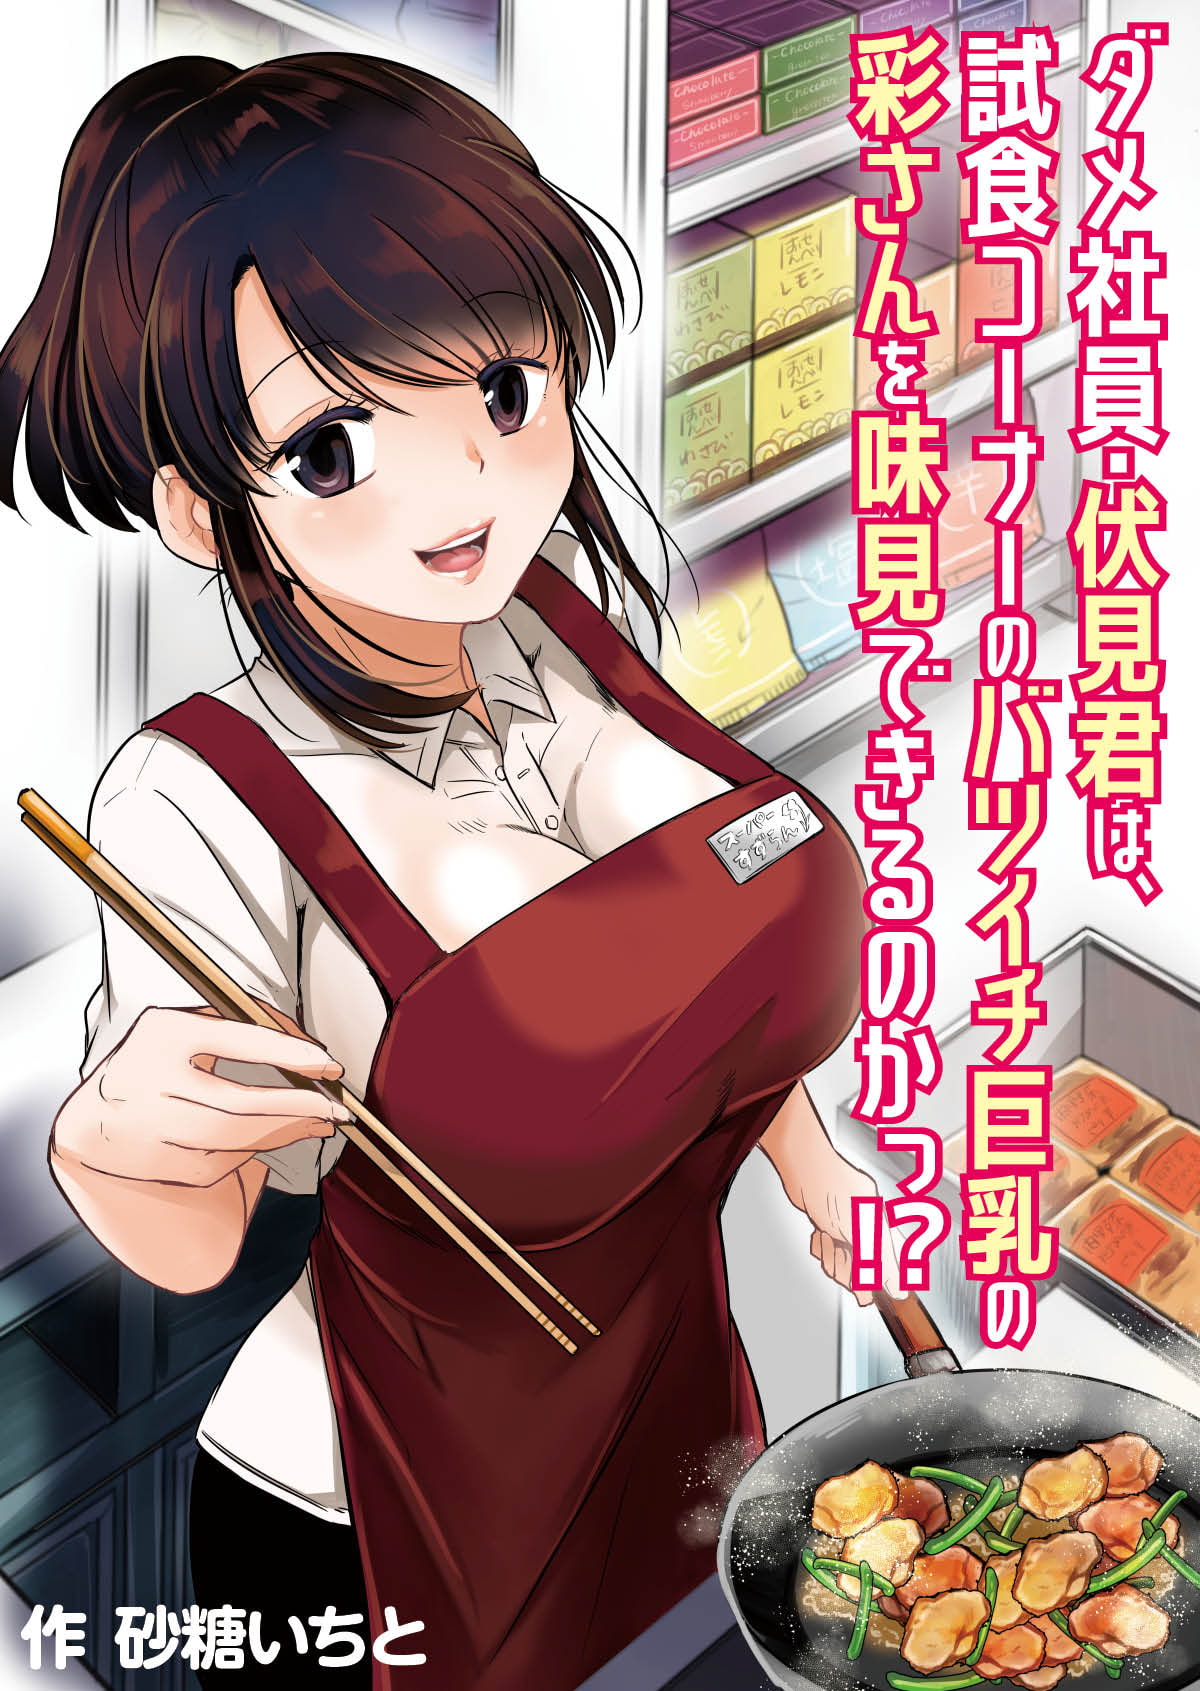 Will the Good For Nothing Salary Worker Get a Taste of the Sample Section's Aya!?